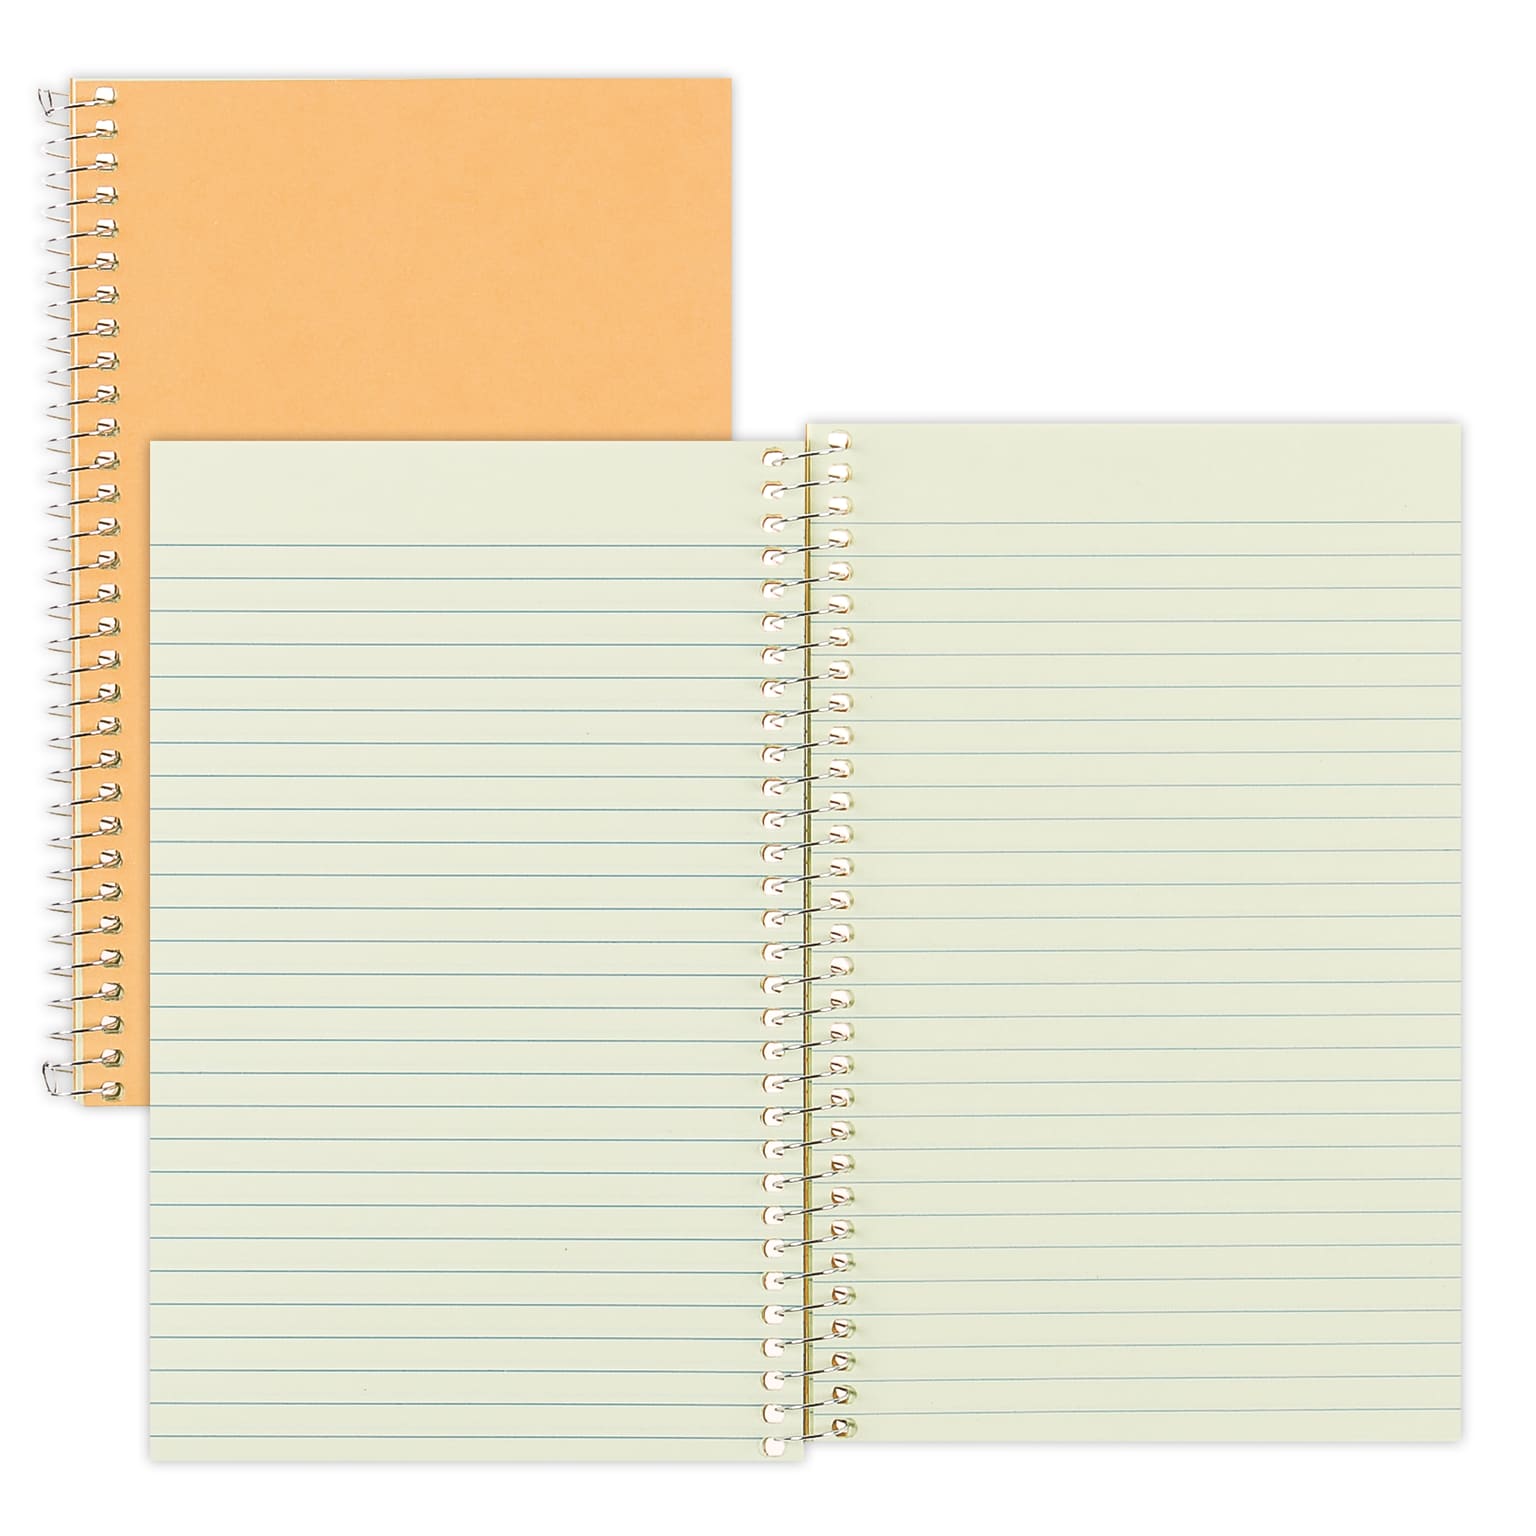 Rediform Brown Board Cover 1-Subject Notebooks, 5 x 7.75, Narrow Ruled, 80 Sheets, Brown (RED33002)